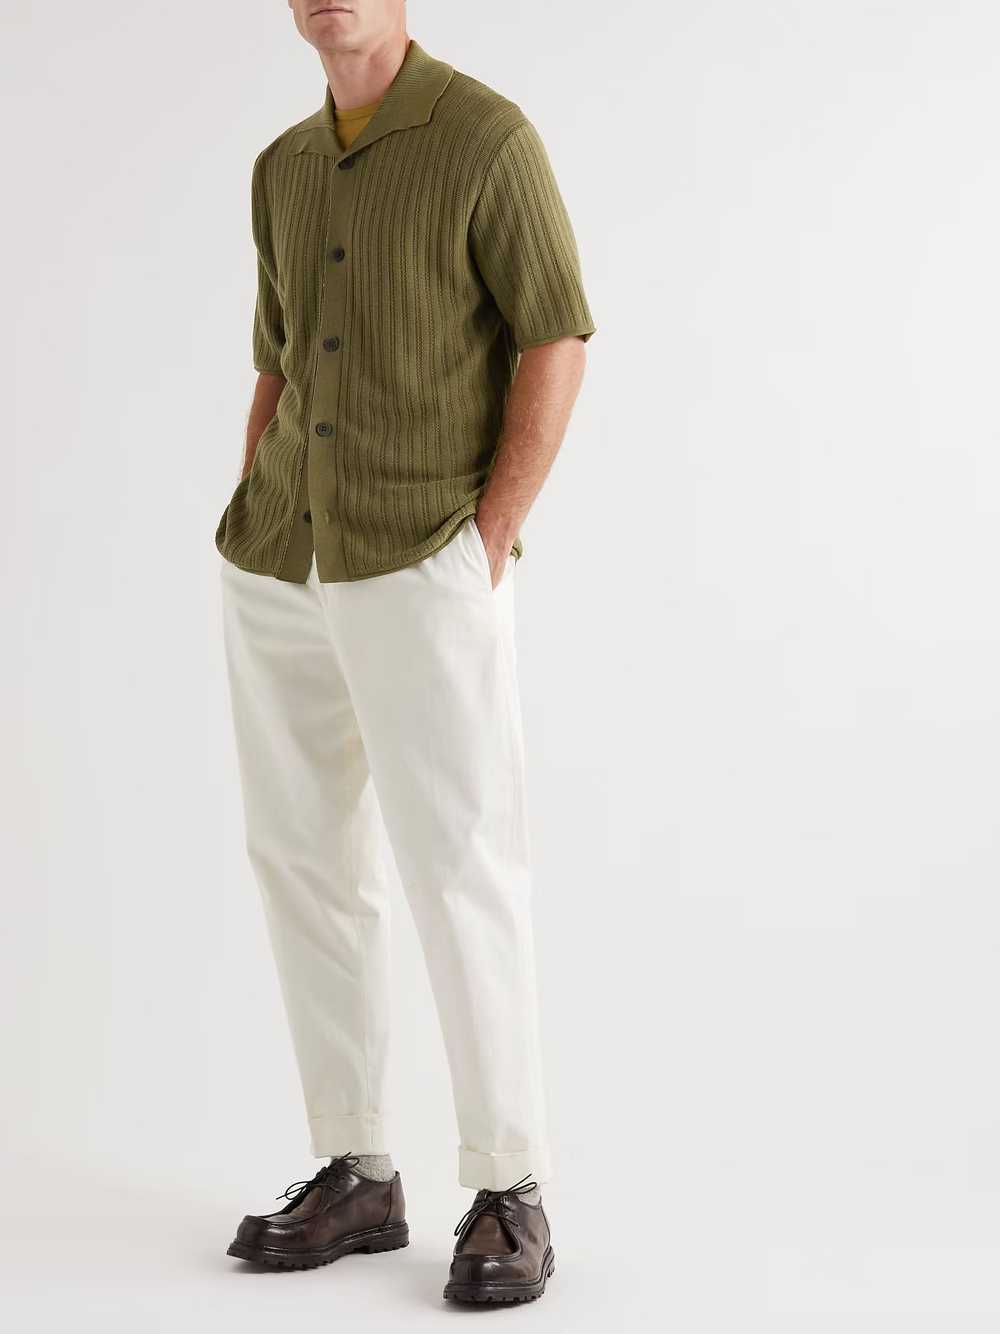 Mr. P. Open-Knit Cotton and Lyocell-Blend Shirt - image 2